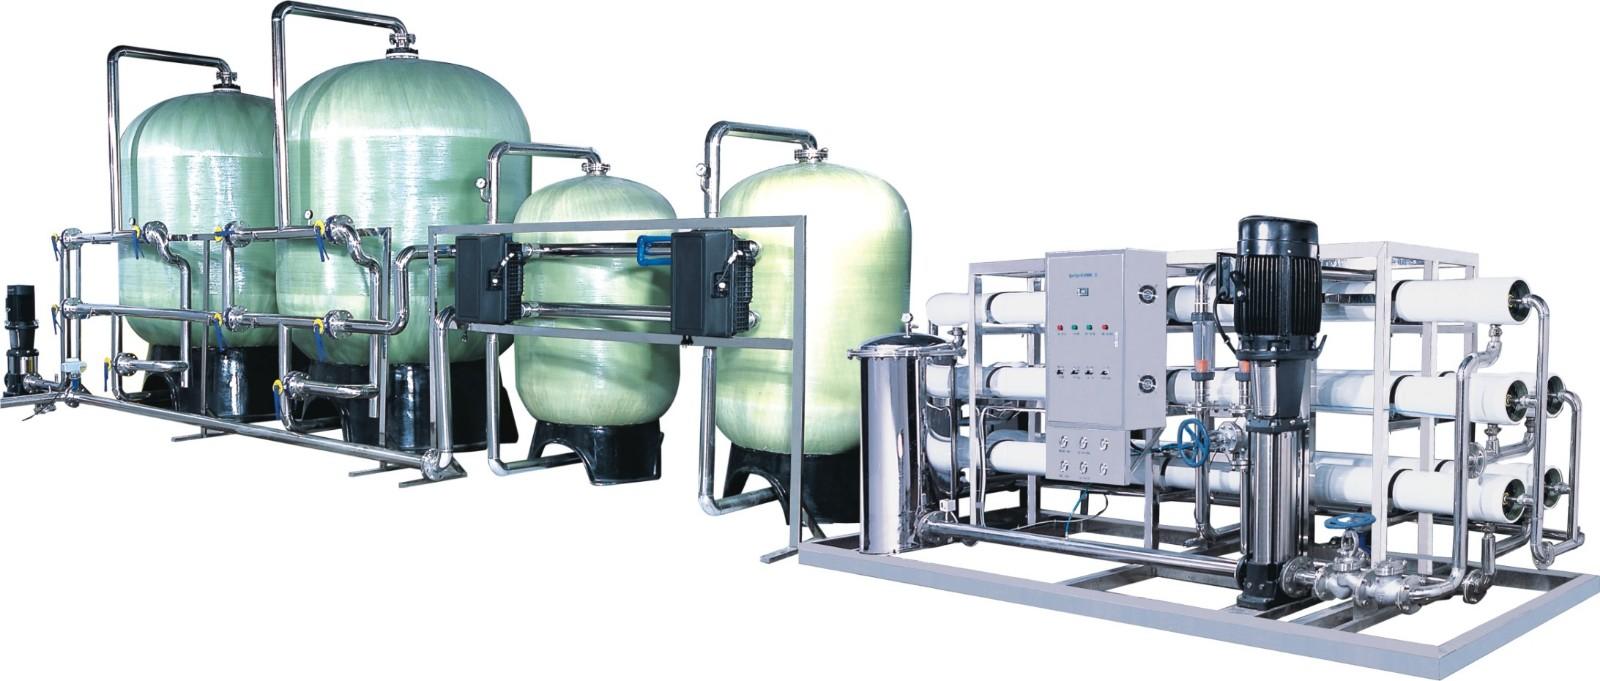 EcoPura 100% quality water treatment process exporter for the global market-1